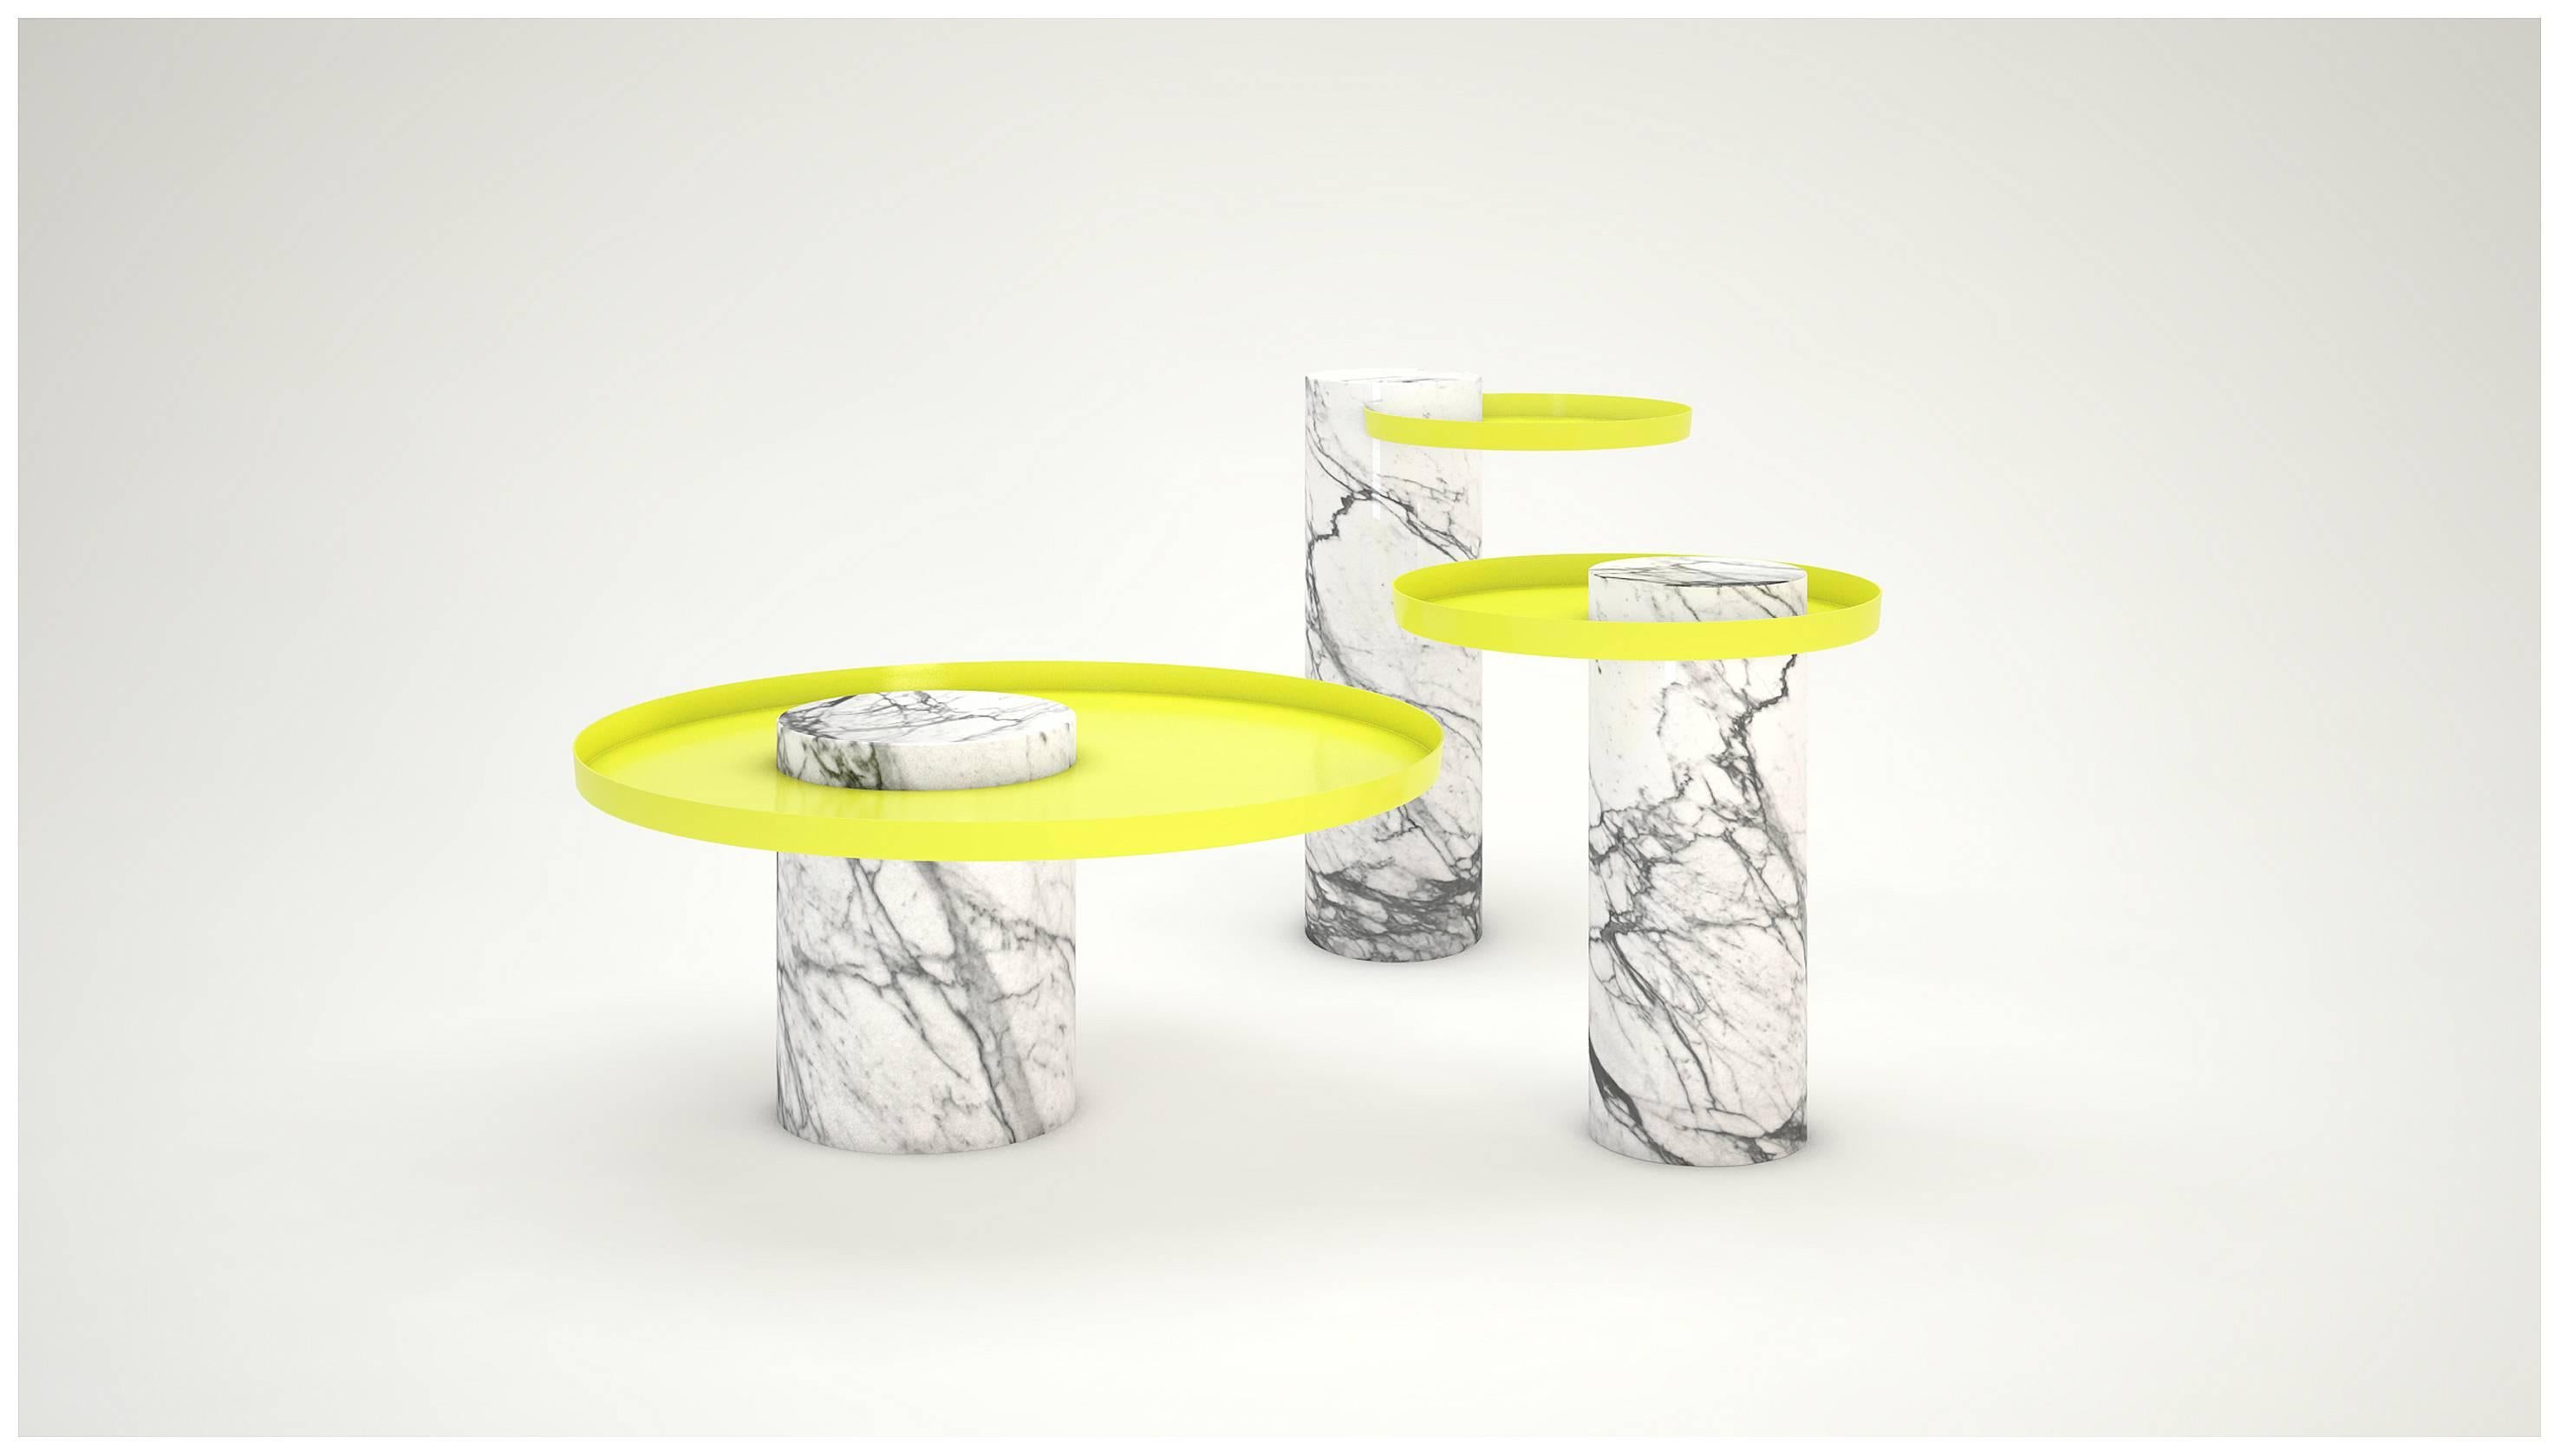 Pair of contemporary gueridon, Sebastian Herkner

The salute table exists in 3 sizes, 3 different marbles for the column and 4 different finishes for the tray for a virtually endless number of configurations. In addition, salute can be made bespoke